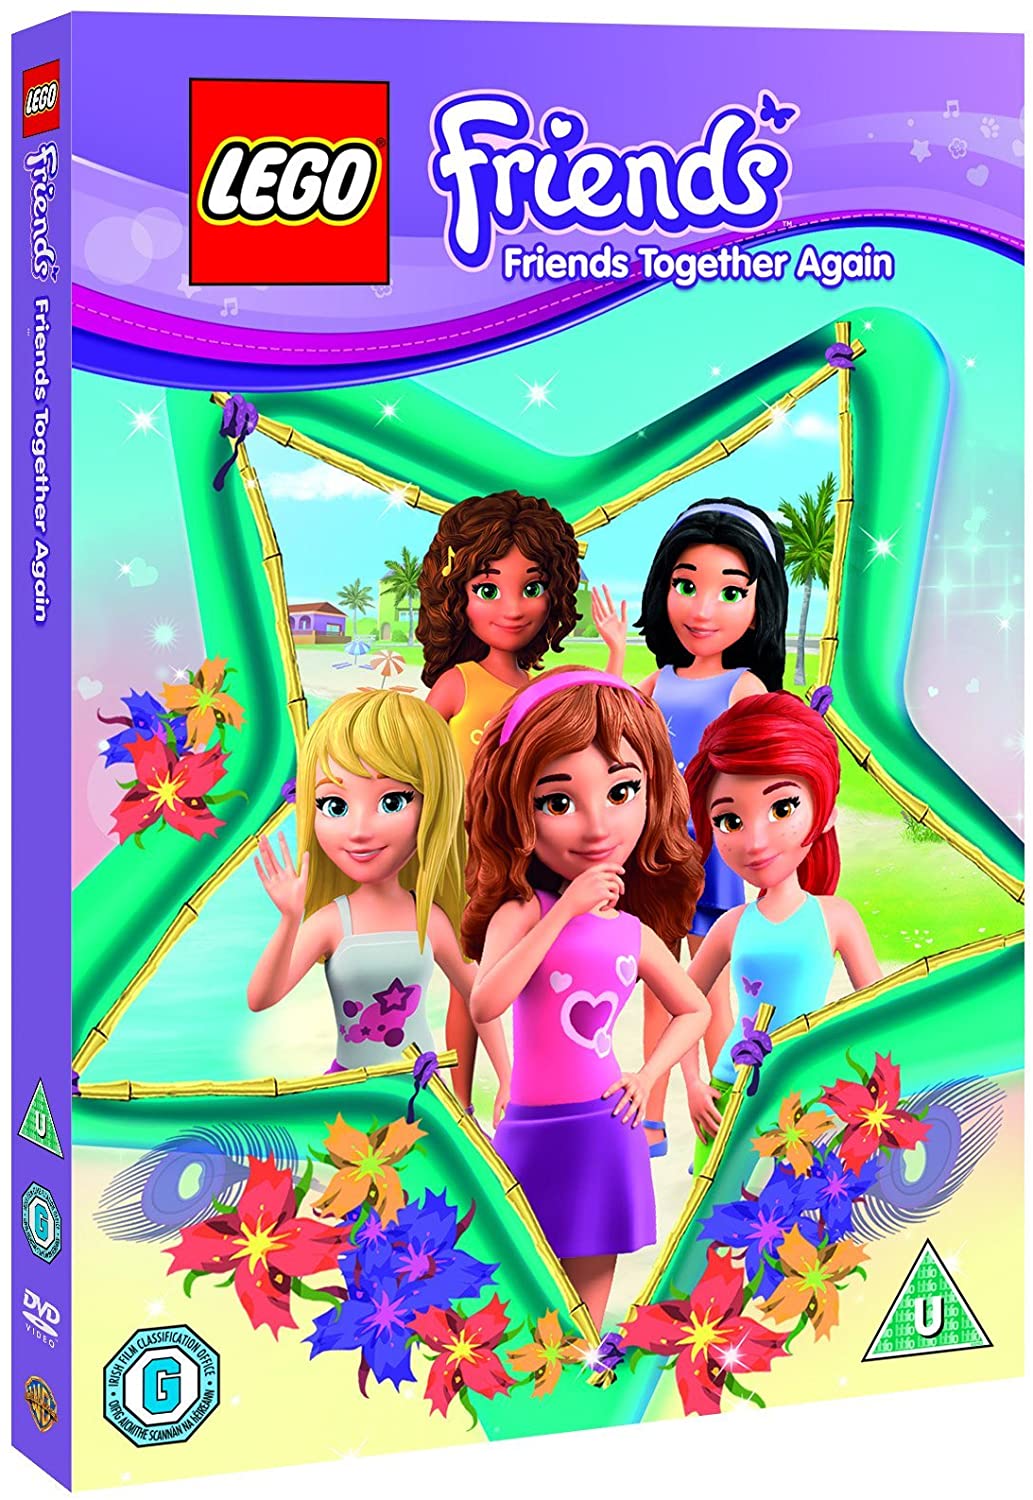 Lego Friends: Friends Together Again [DVD] [2017]